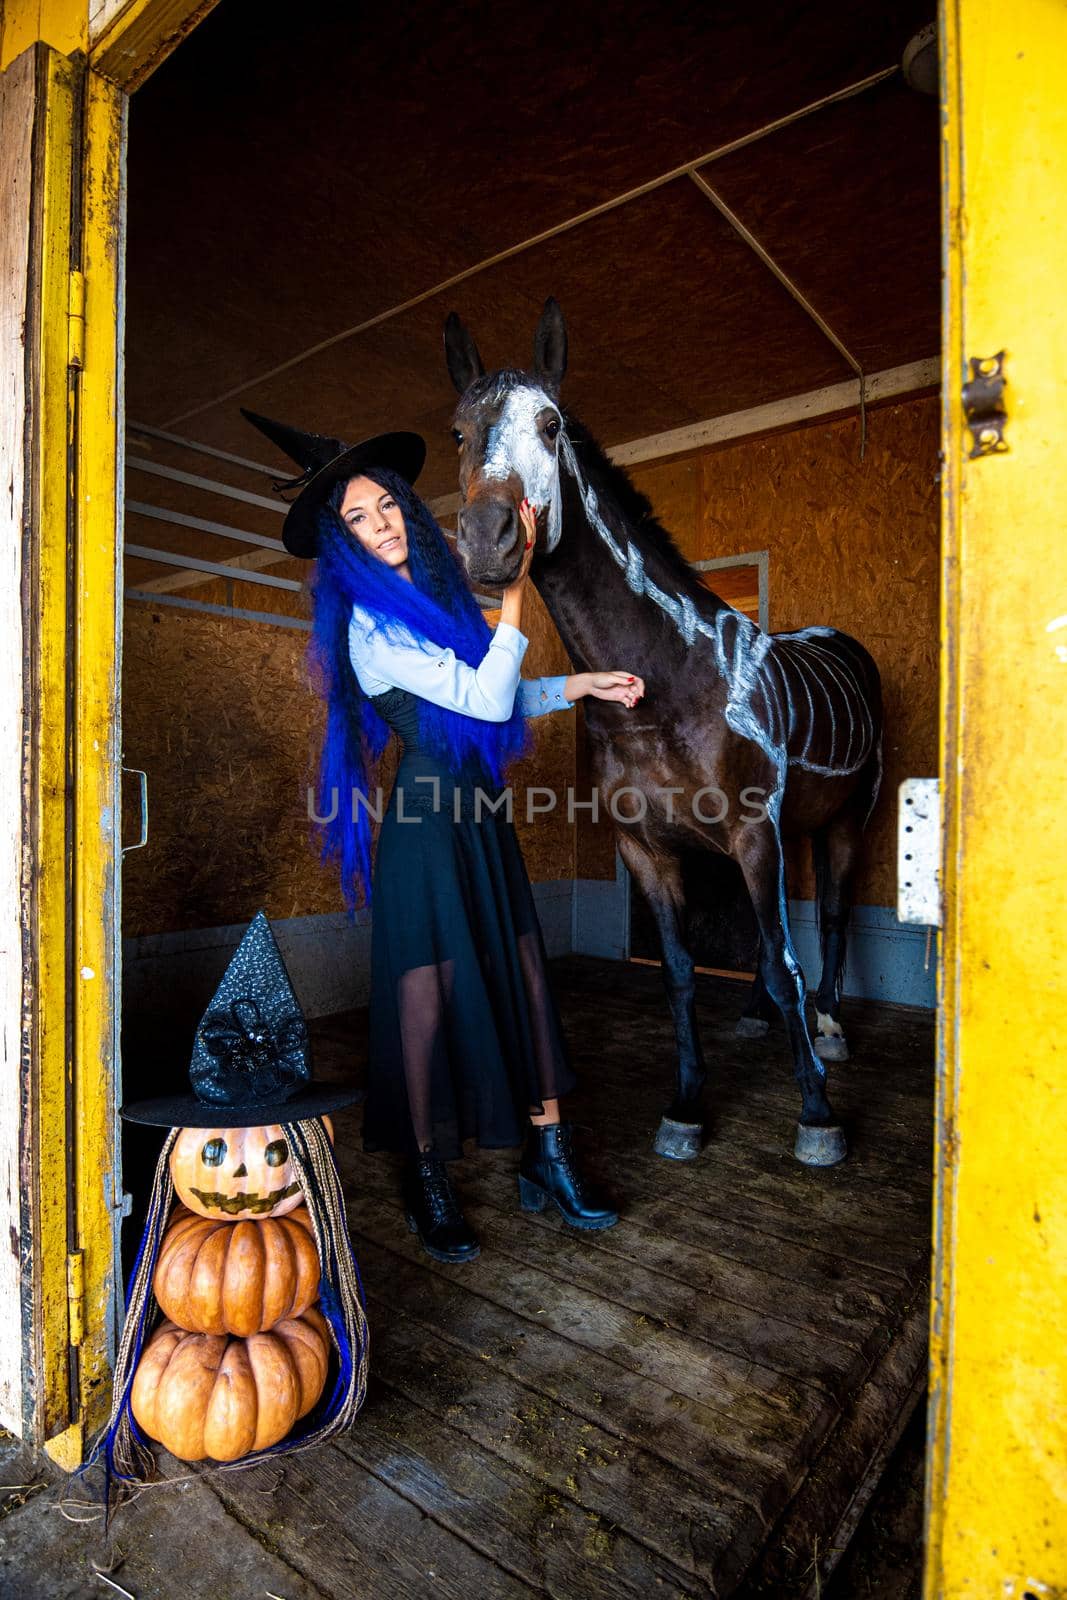 A girl dressed as a witch stands in a corral with a horse on which a skeleton is painted in white paint, in the foreground is an evil figurine of pumpkins by Madhourse